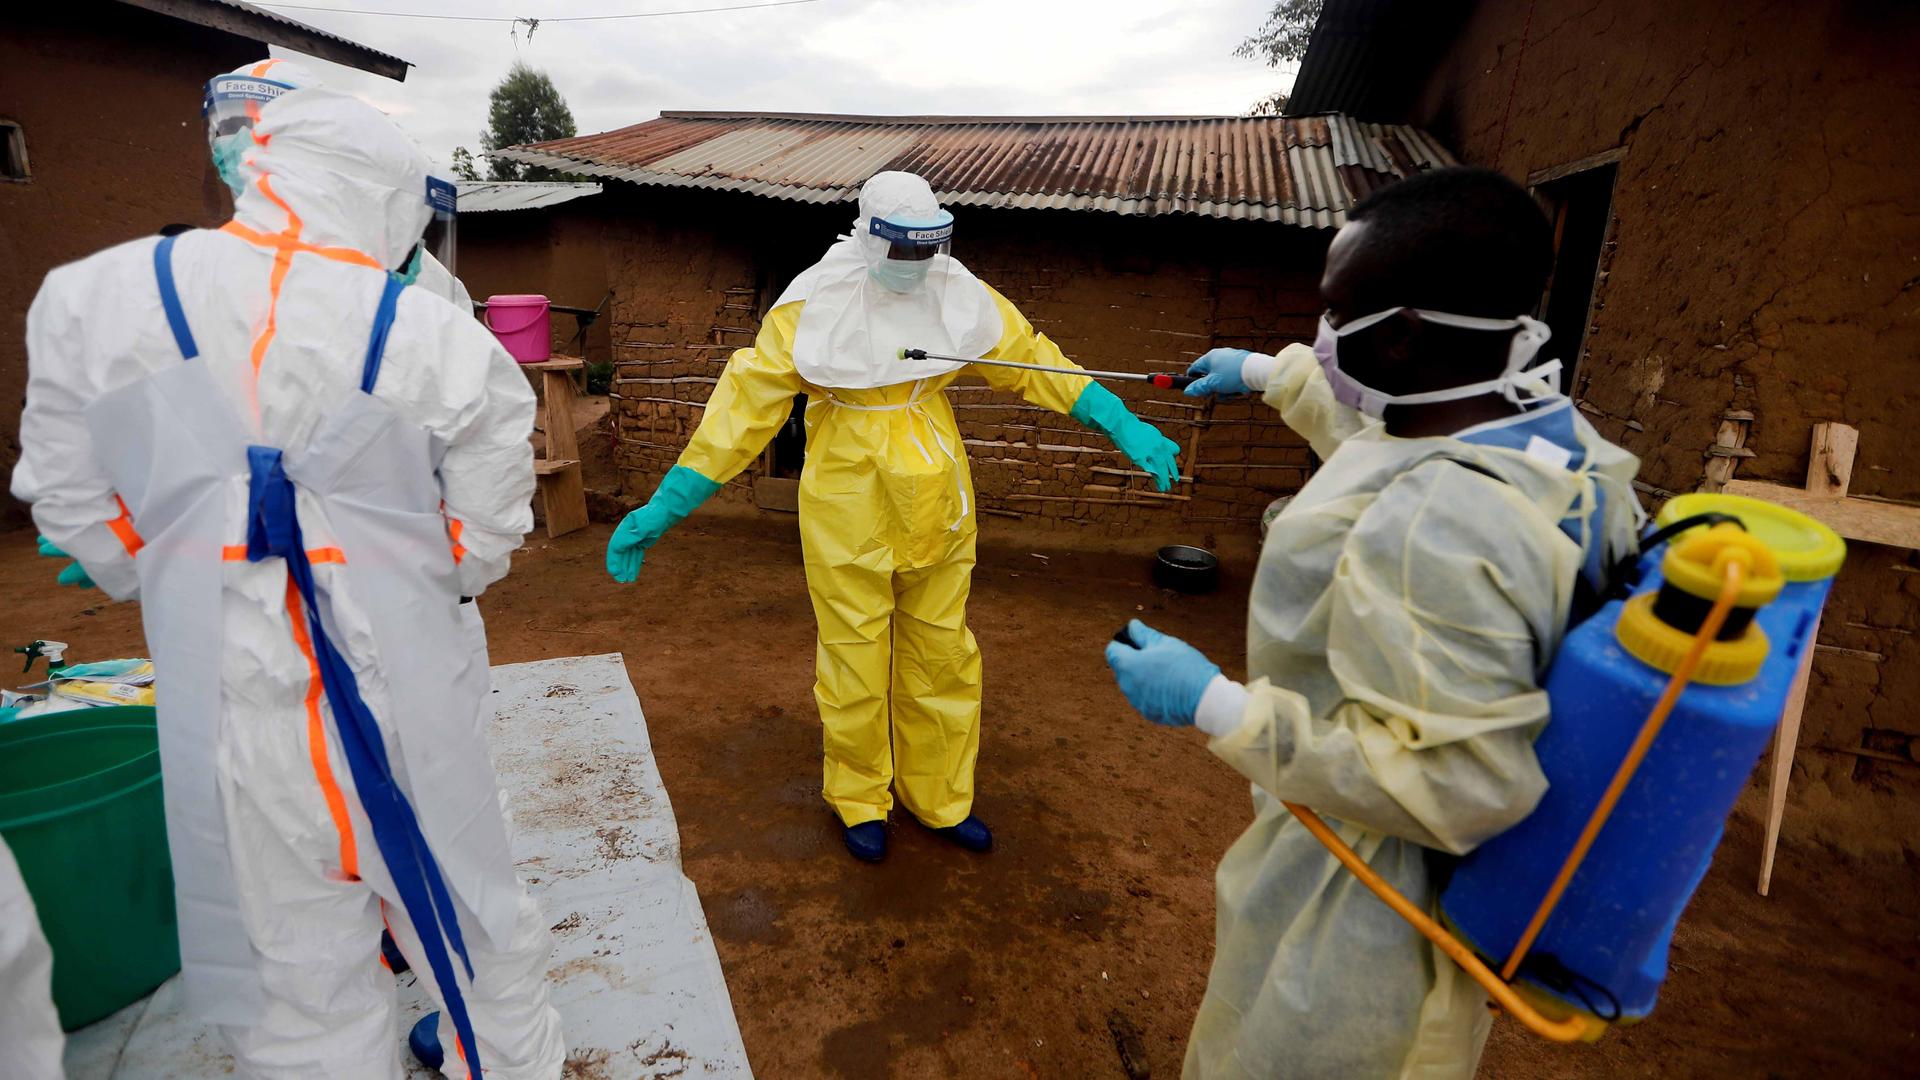 A health care worker who volunteered in the Ebola response, decontaminates his colleague after he entered the house of a woman suspected of dying of Ebola, in the eastern Congolese town of Beni in the Democratic Republic of the Congo, October 2019.